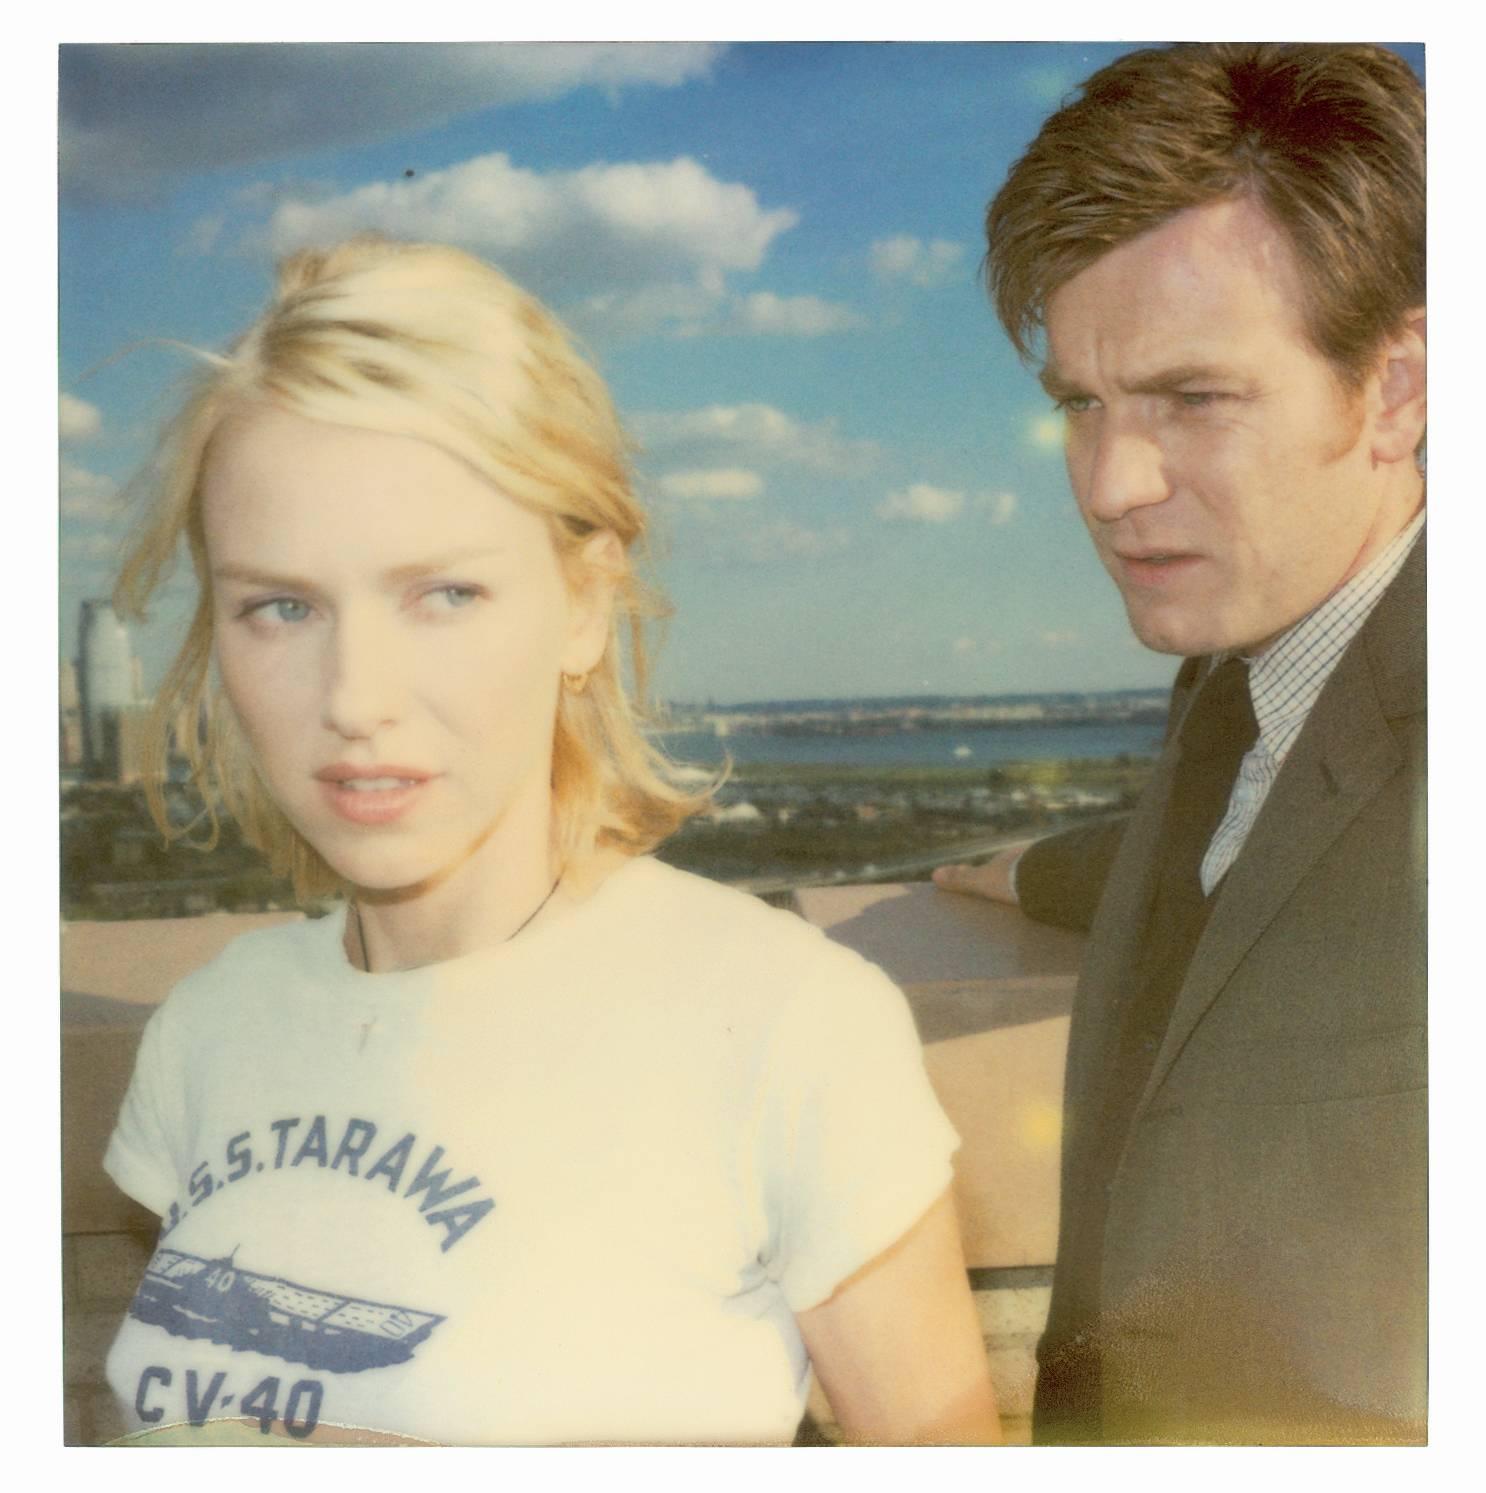 Lila and Sam from the movie Stay with Ewan McGregor, Naomi Watts - Gray Color Photograph by Stefanie Schneider